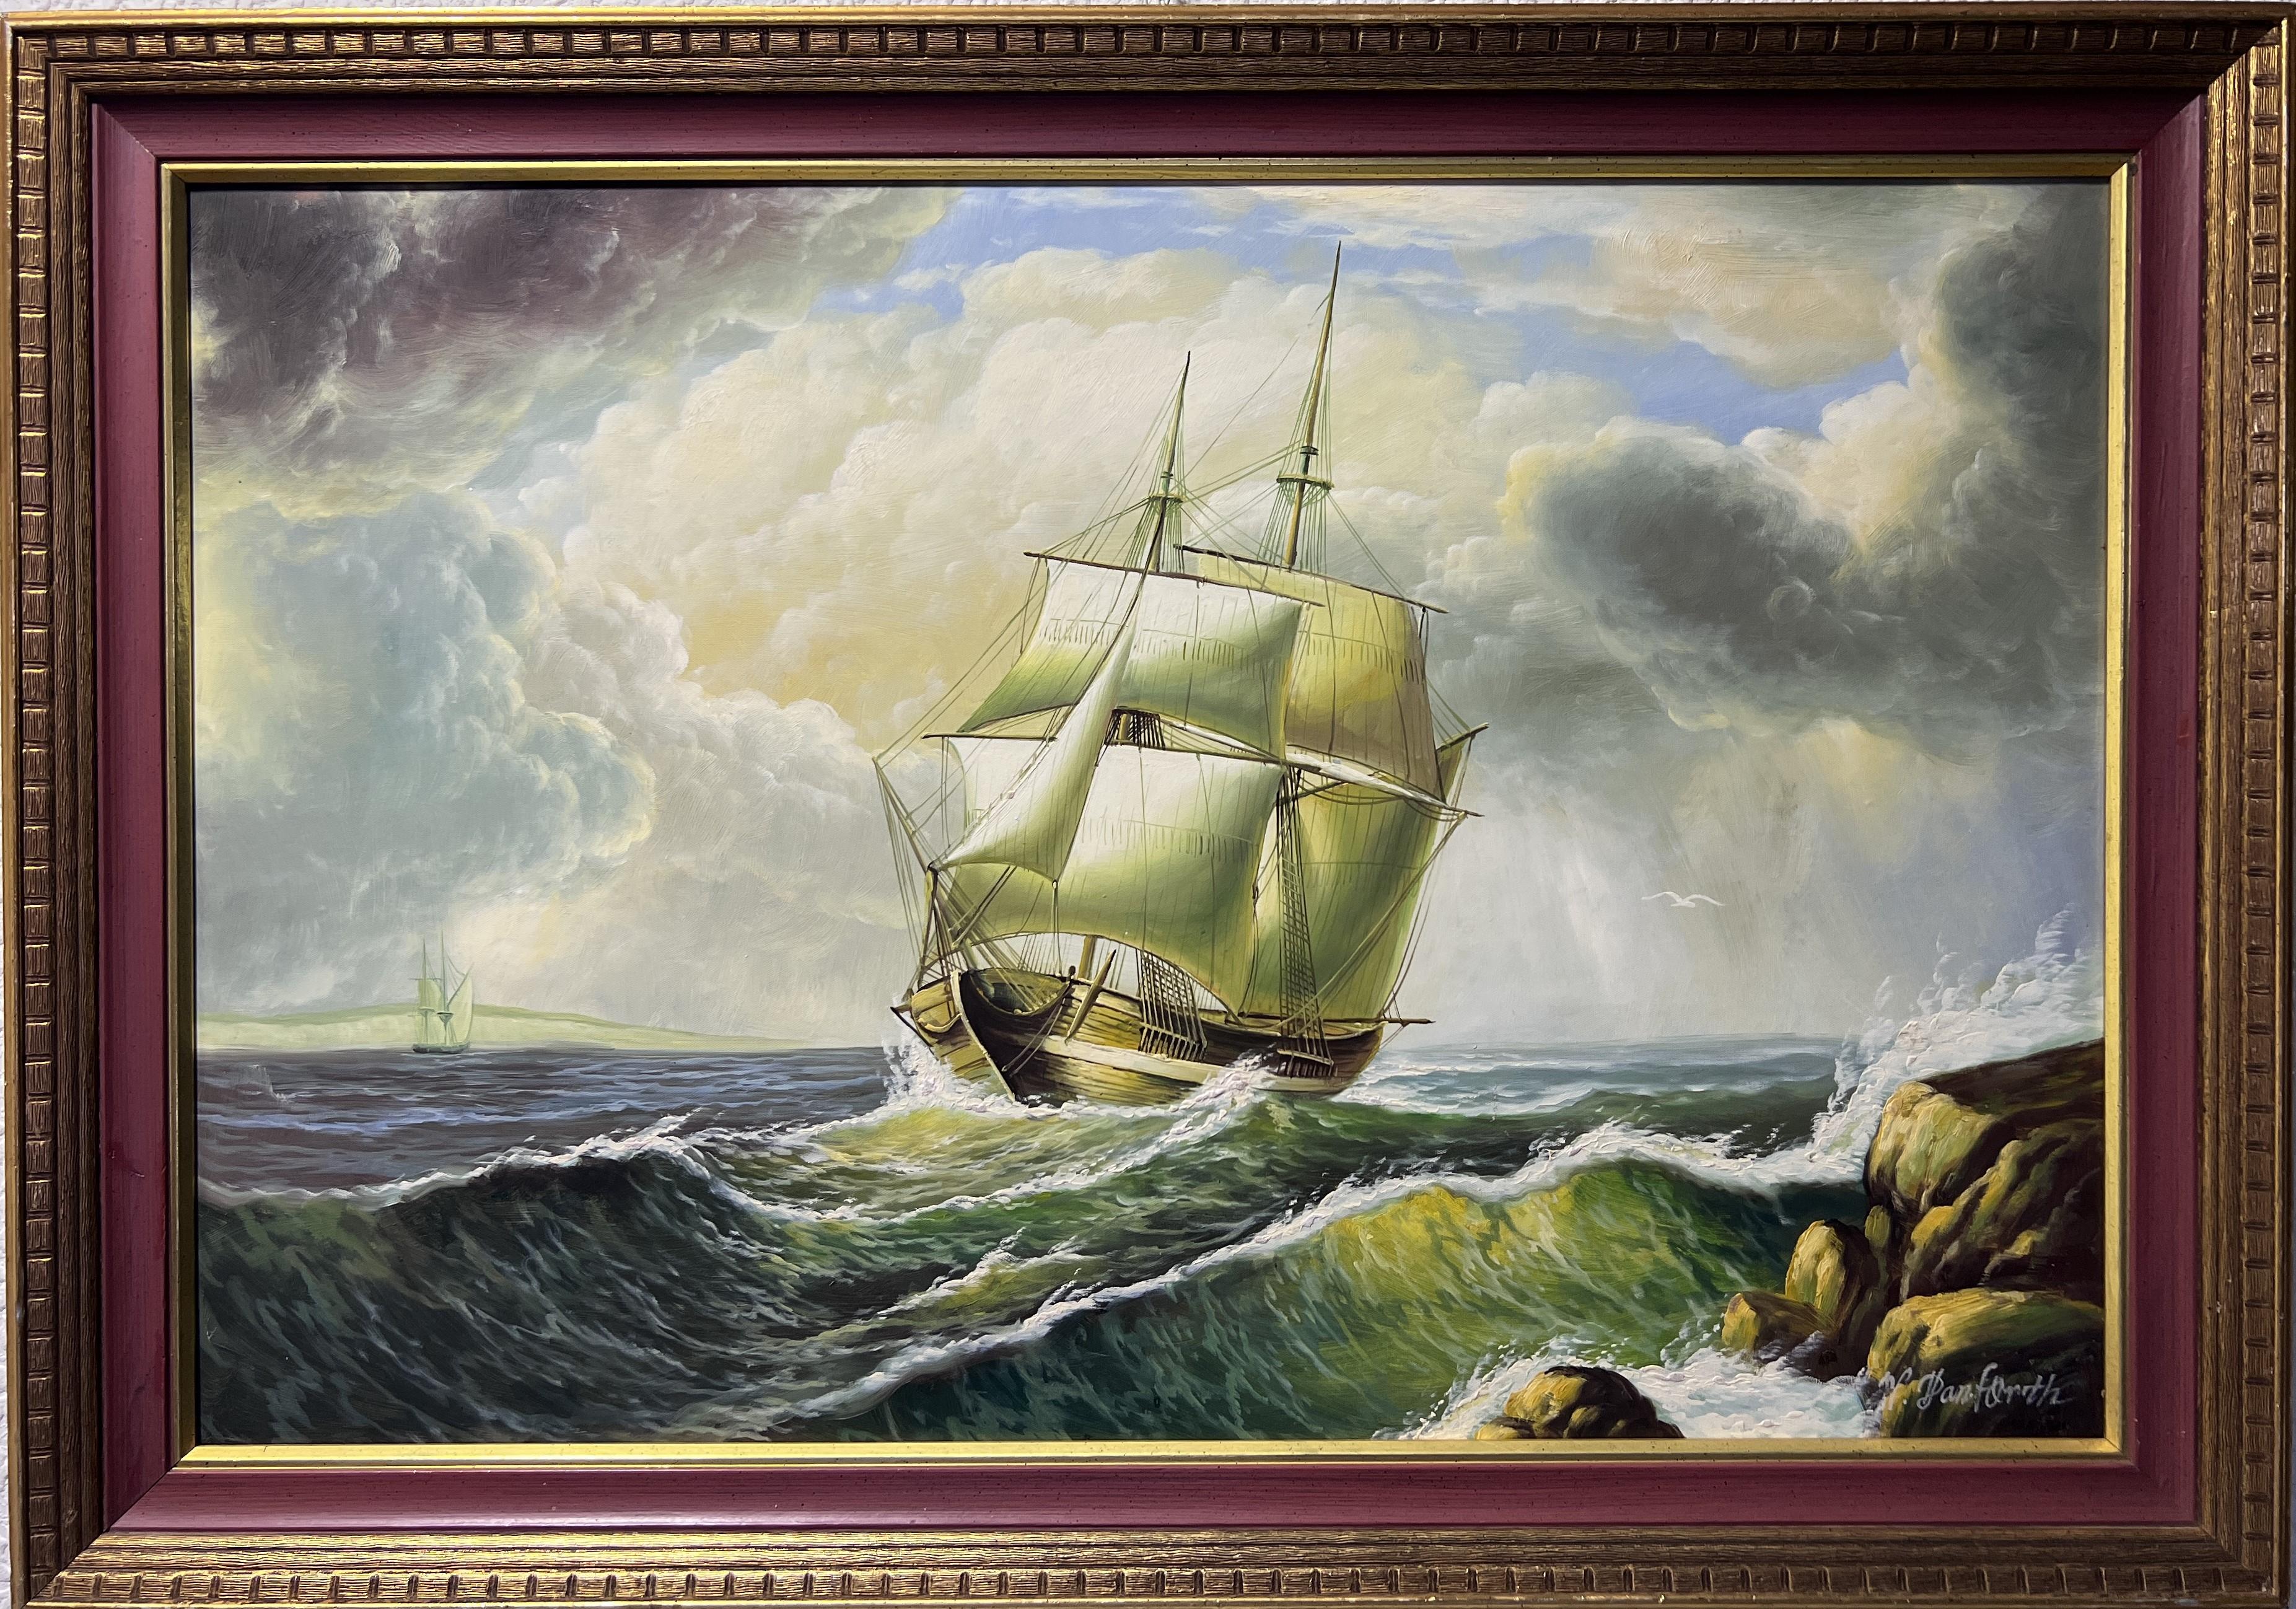 Unknown Landscape Painting - Large oil painting on canvas, seascape, Sailing Ship in the Stormy Ocean, Signed